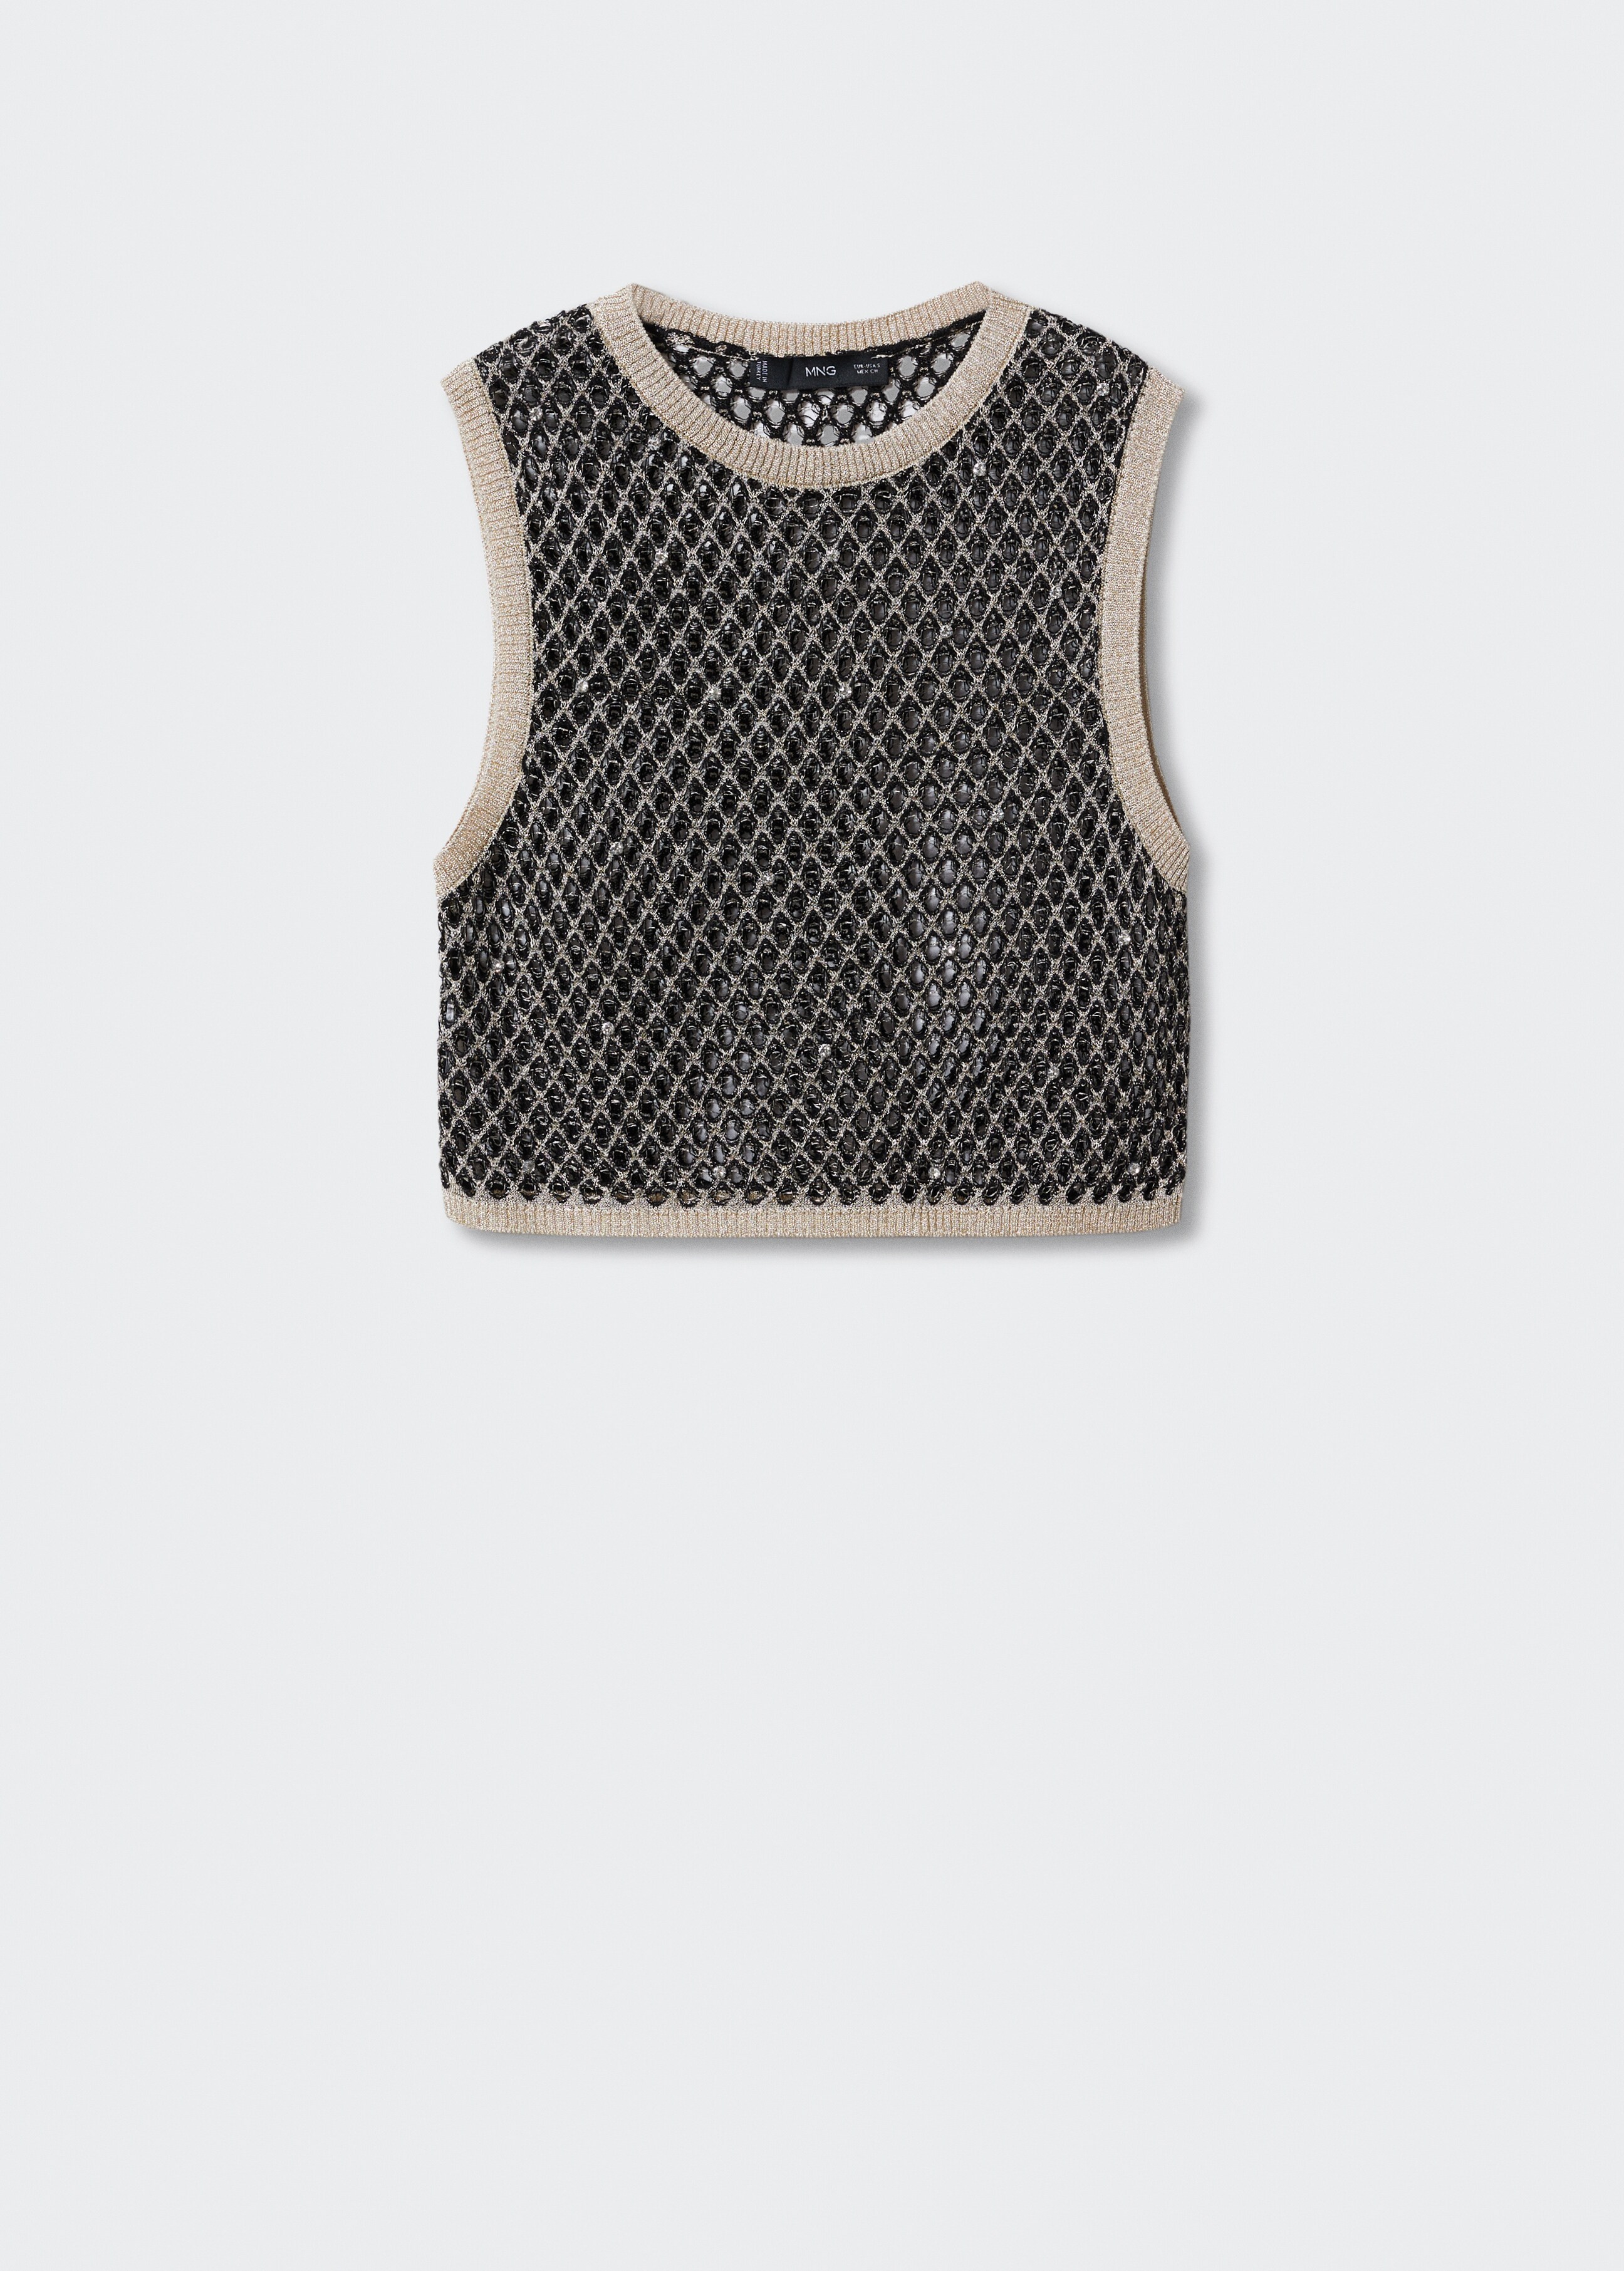 Openwork knitted lurex top - Article without model